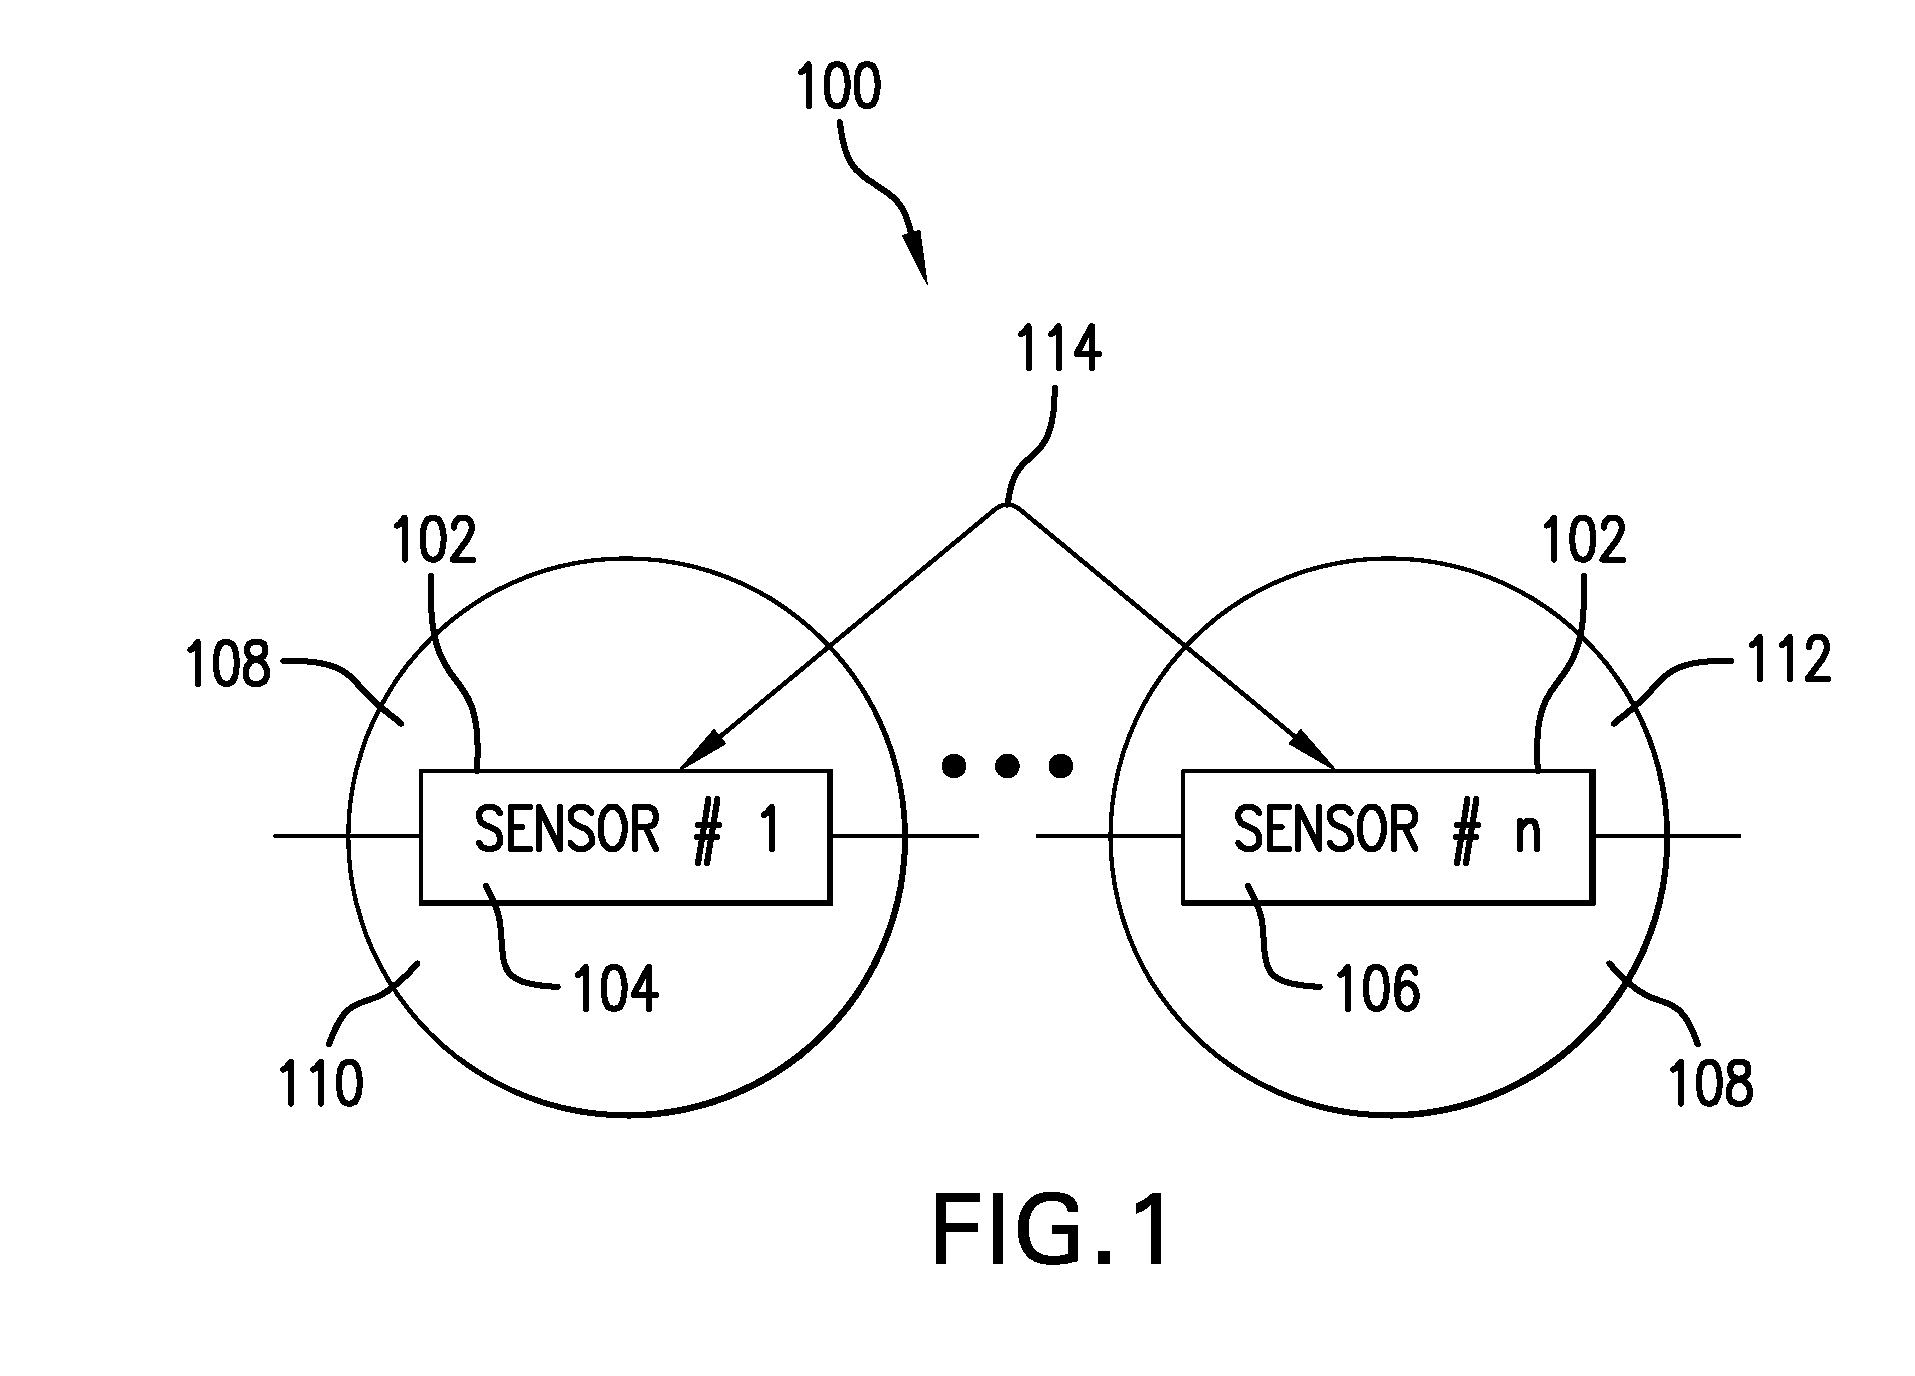 System and method for wireless, motion and position-sensing, integrating radiation sensor for occupational and environmental dosimetry